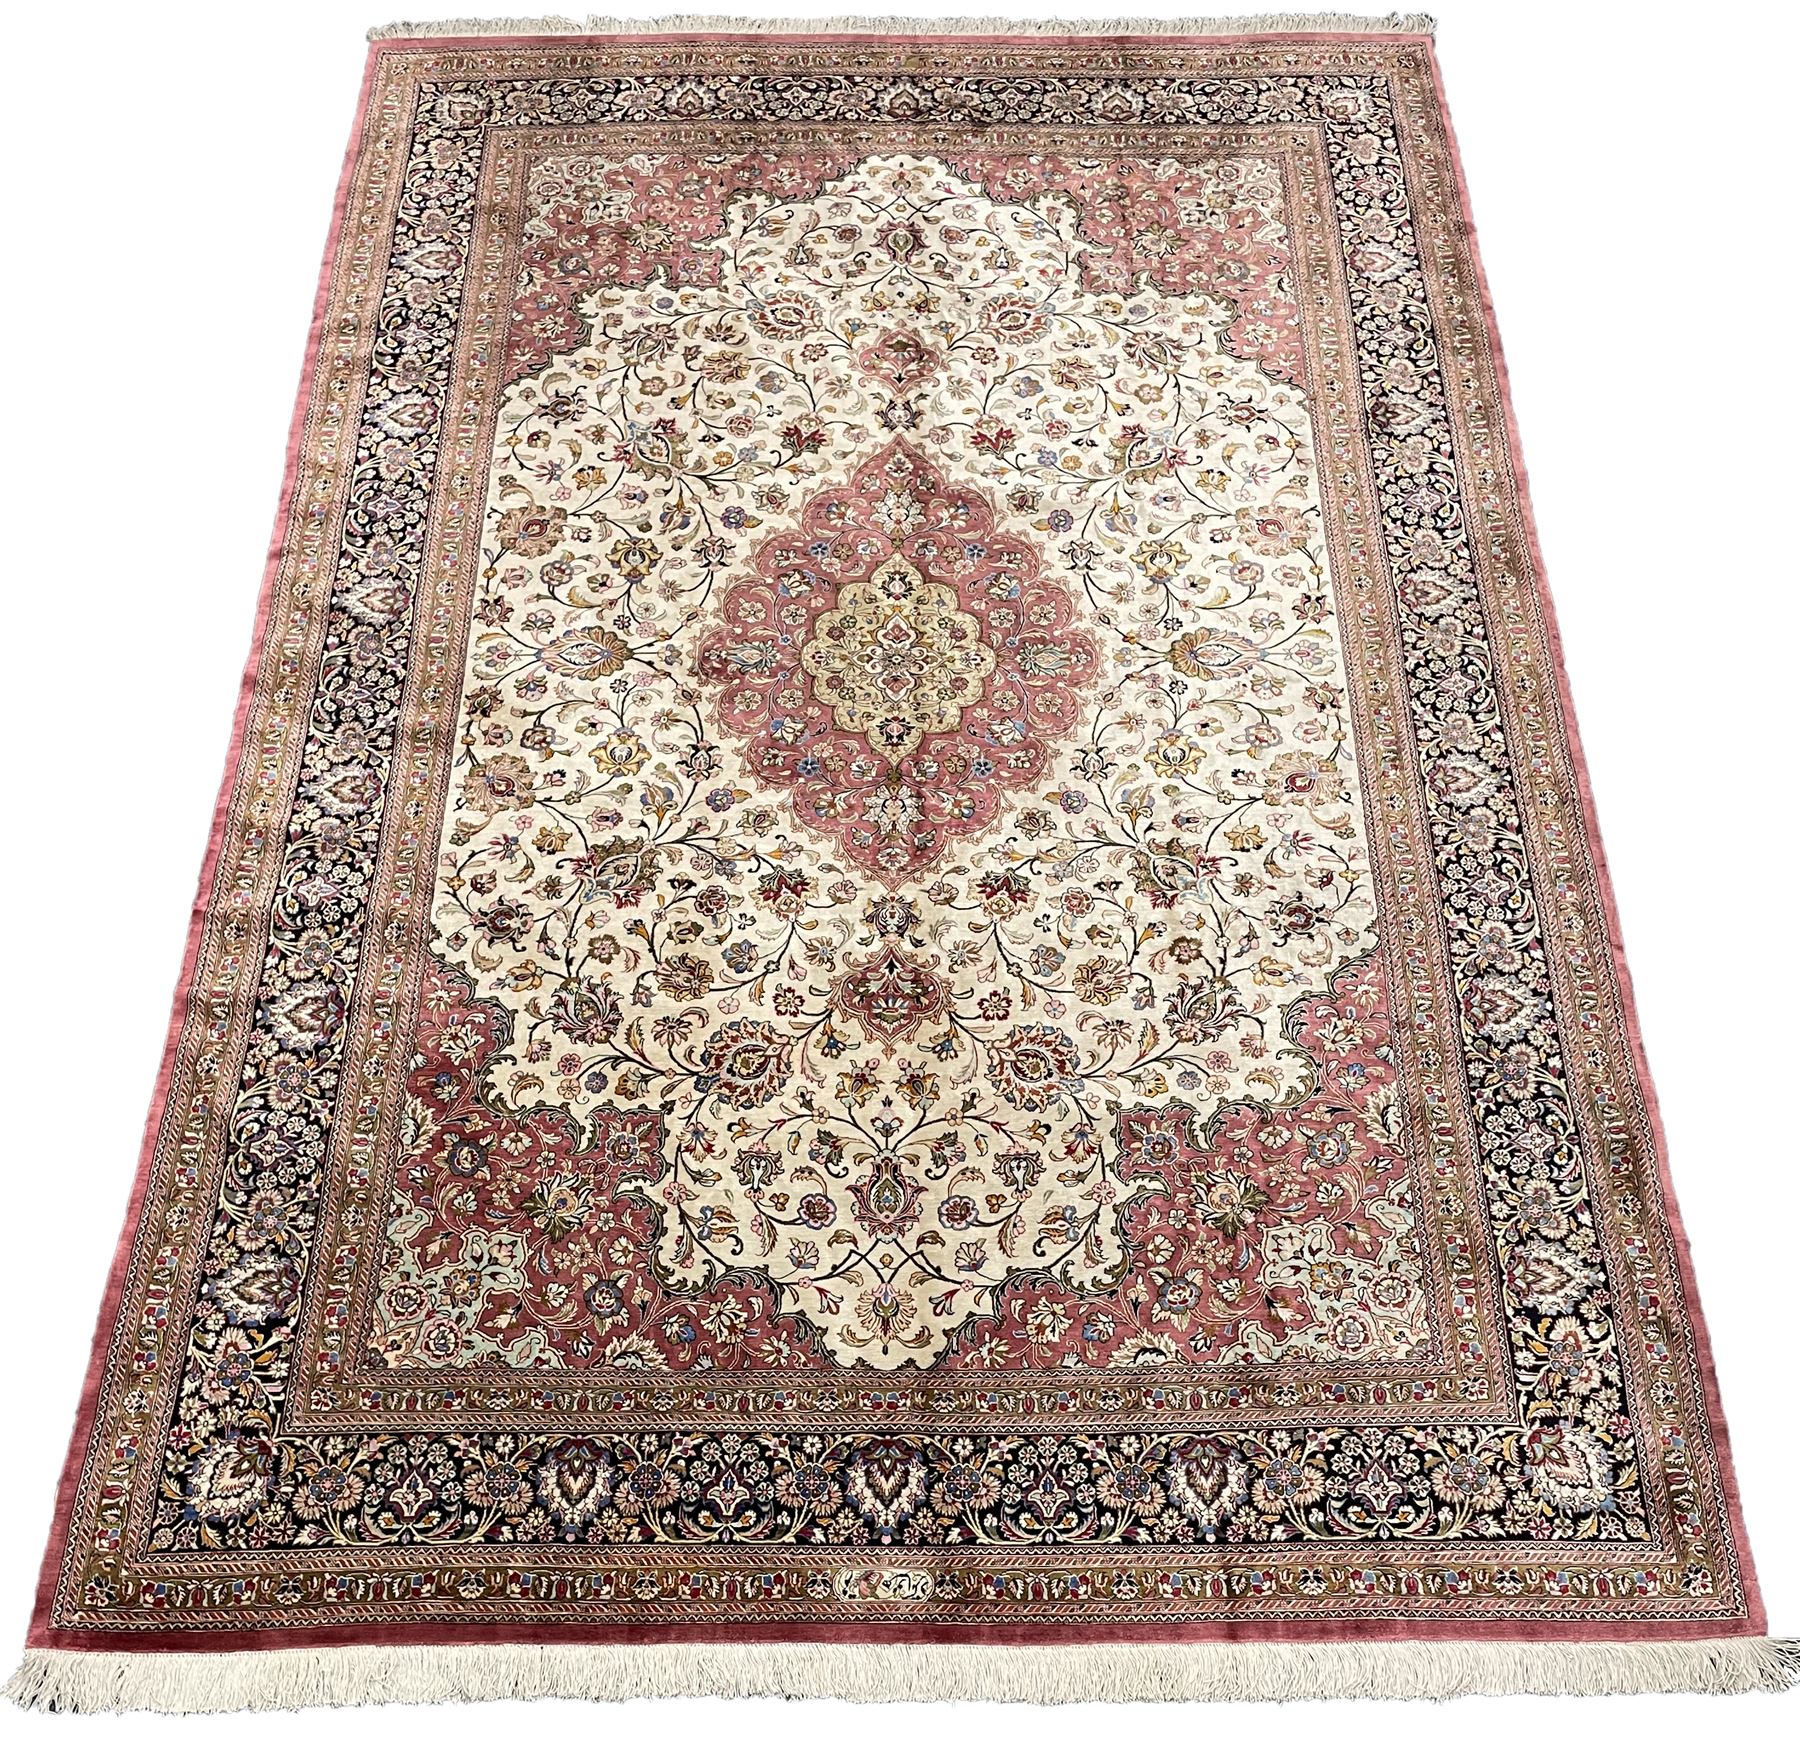 Finely knotted Persian Qom silk rug